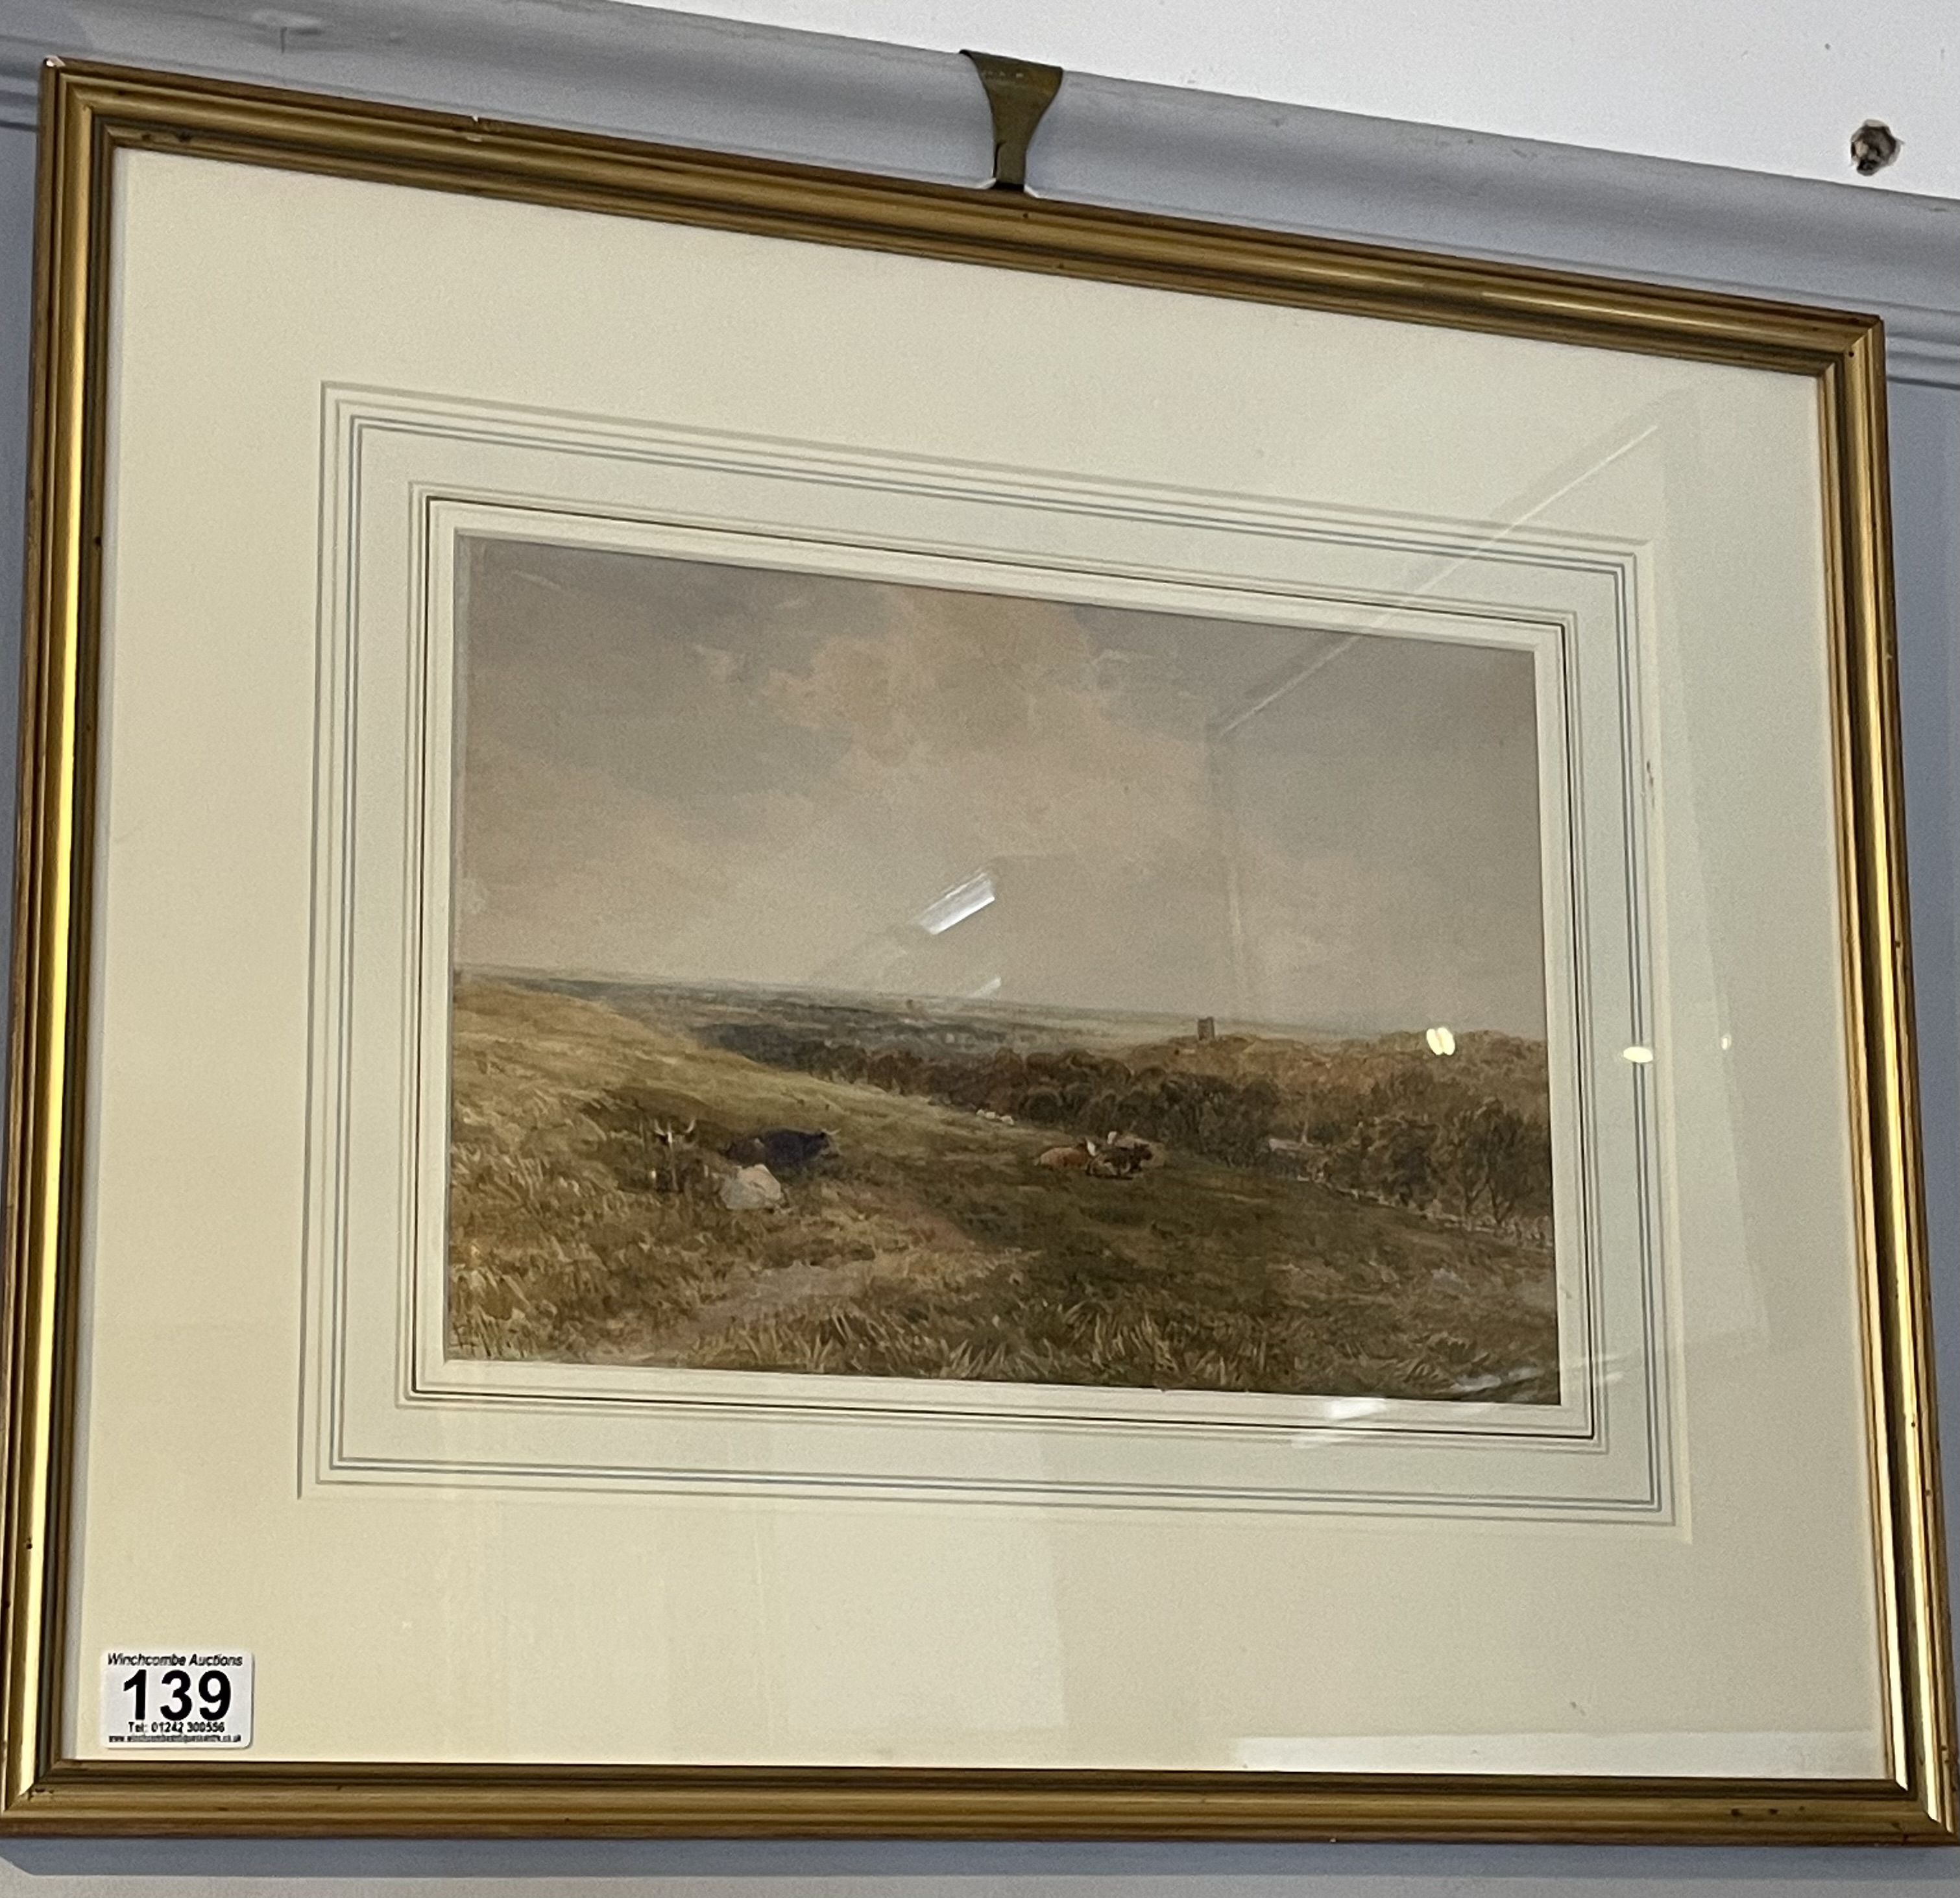 A framed watercolour by Edmond Morison Wimperis, dated 1879 depicting cattle in a pasture